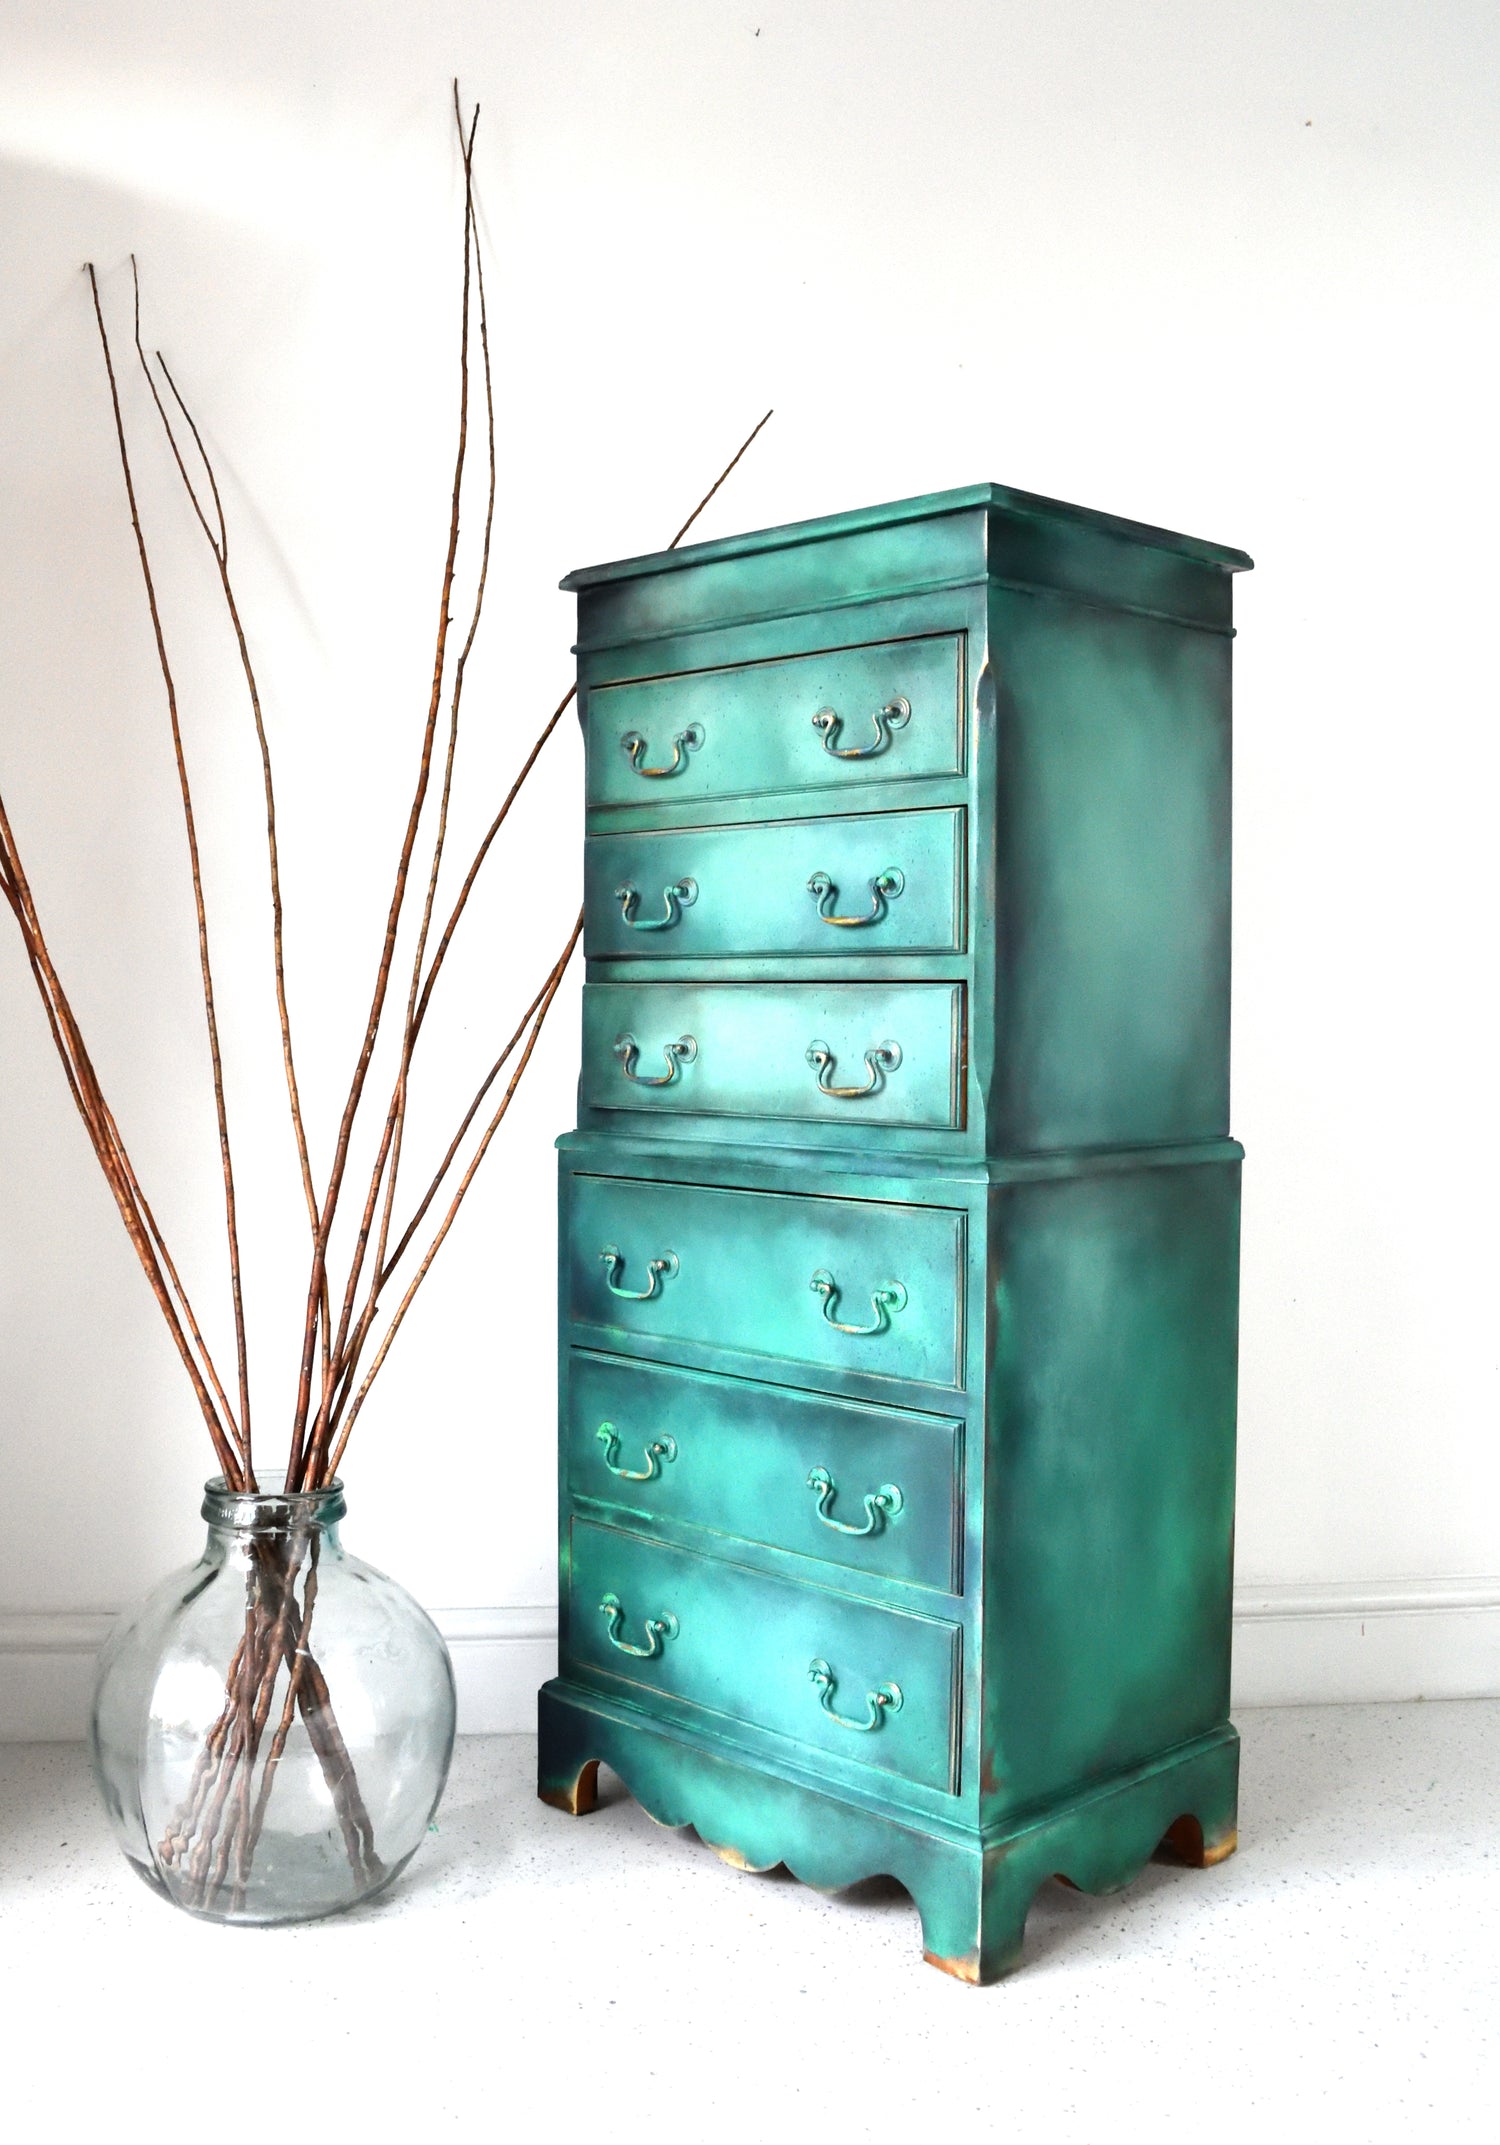 Tallboy turqouise bureau, painted in Chloe Kempster free spirited artist, paint collaboration with Daydream Apothecary - the Botanical collection